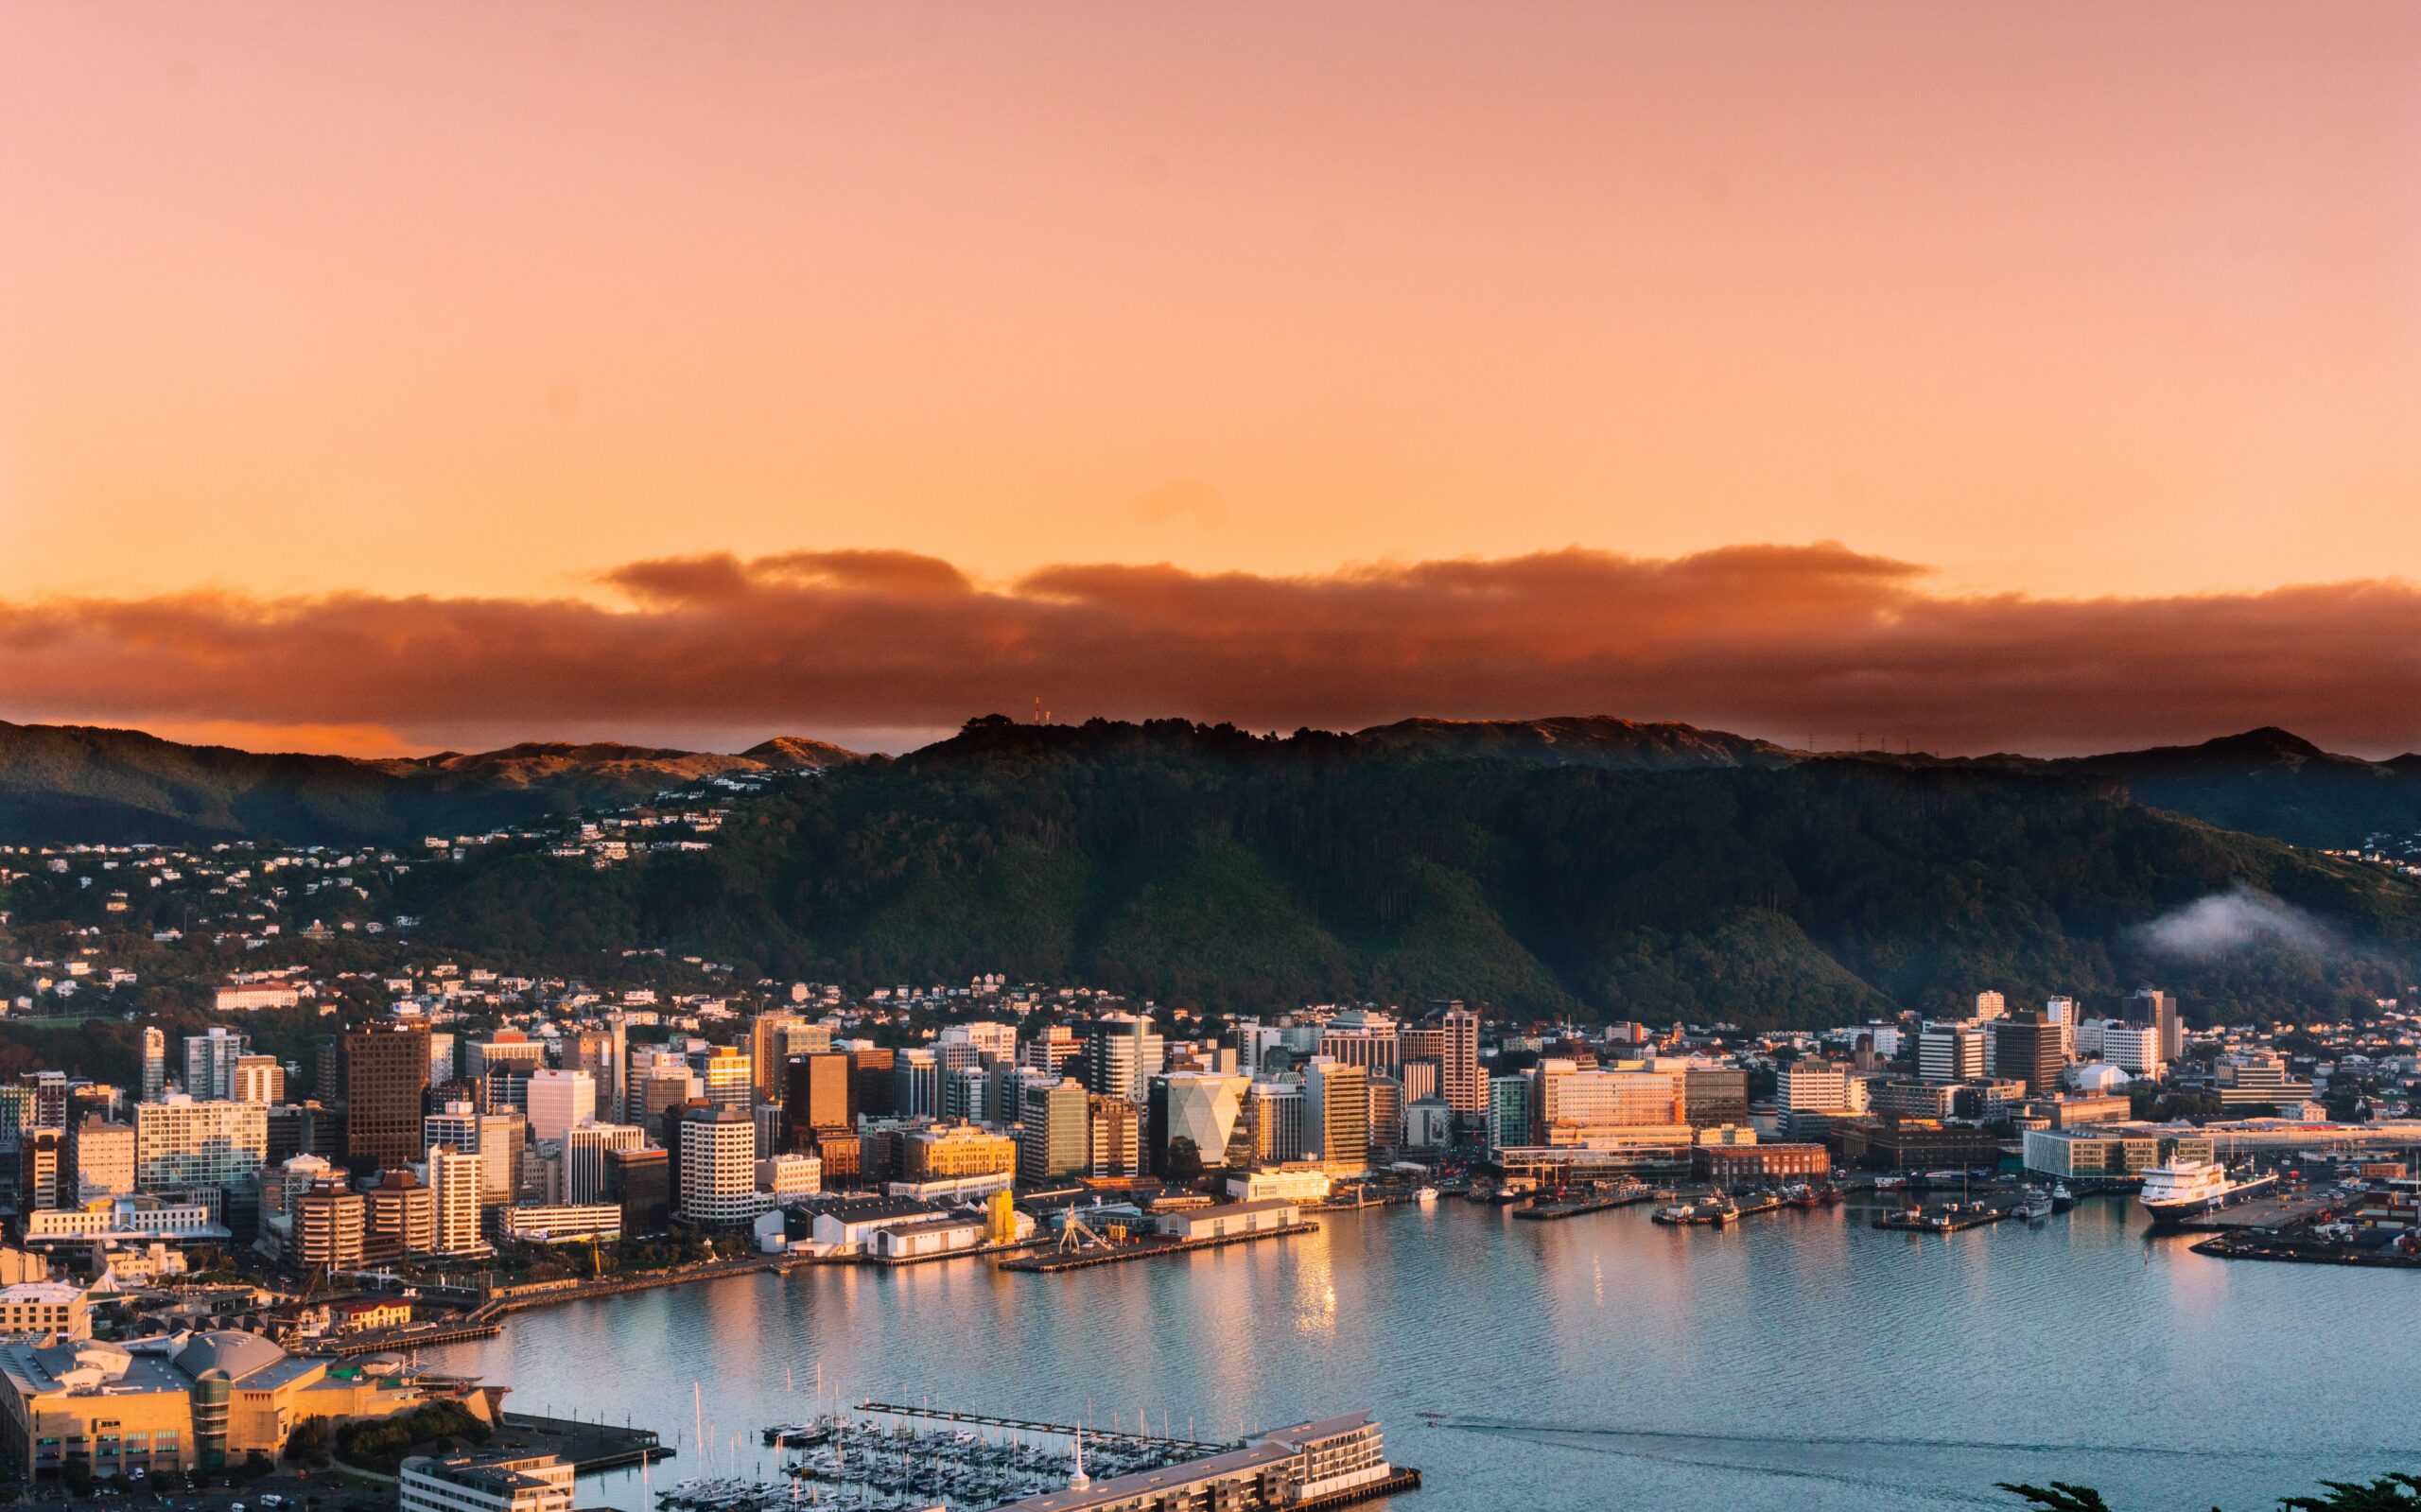 Pictured: evening sunset view on the mountainside of the city of Wellington, New Zealand